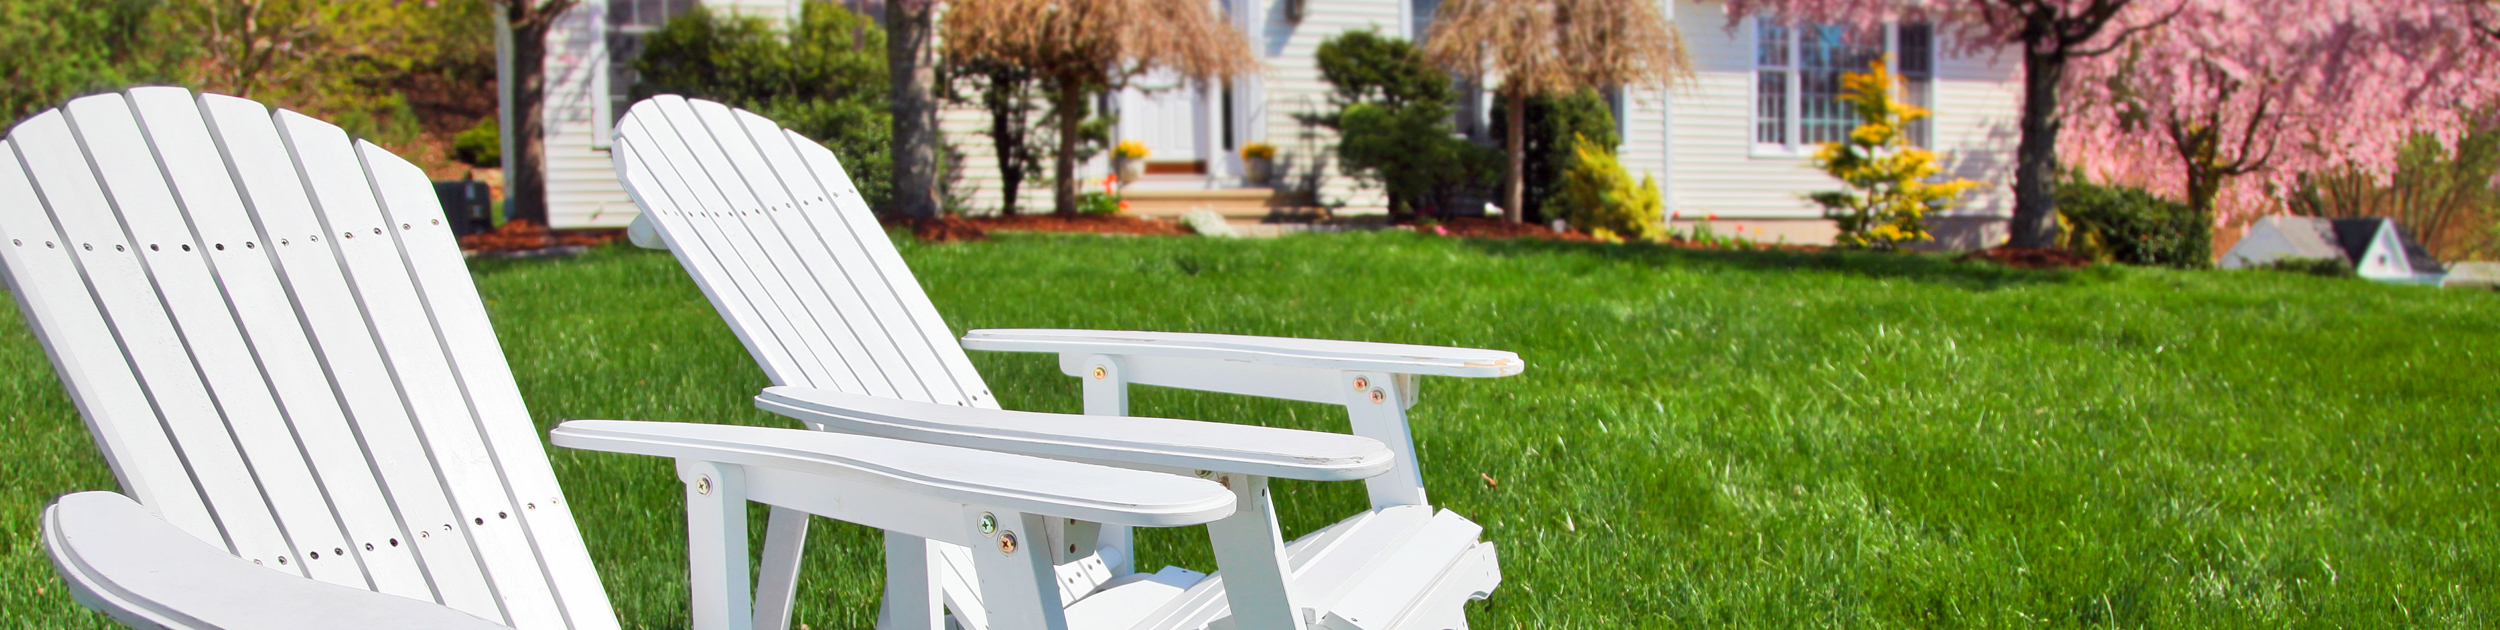 spring image - white house with blooming spring plantings out front and two white adirondack chairs sitting on a beautiful lawn